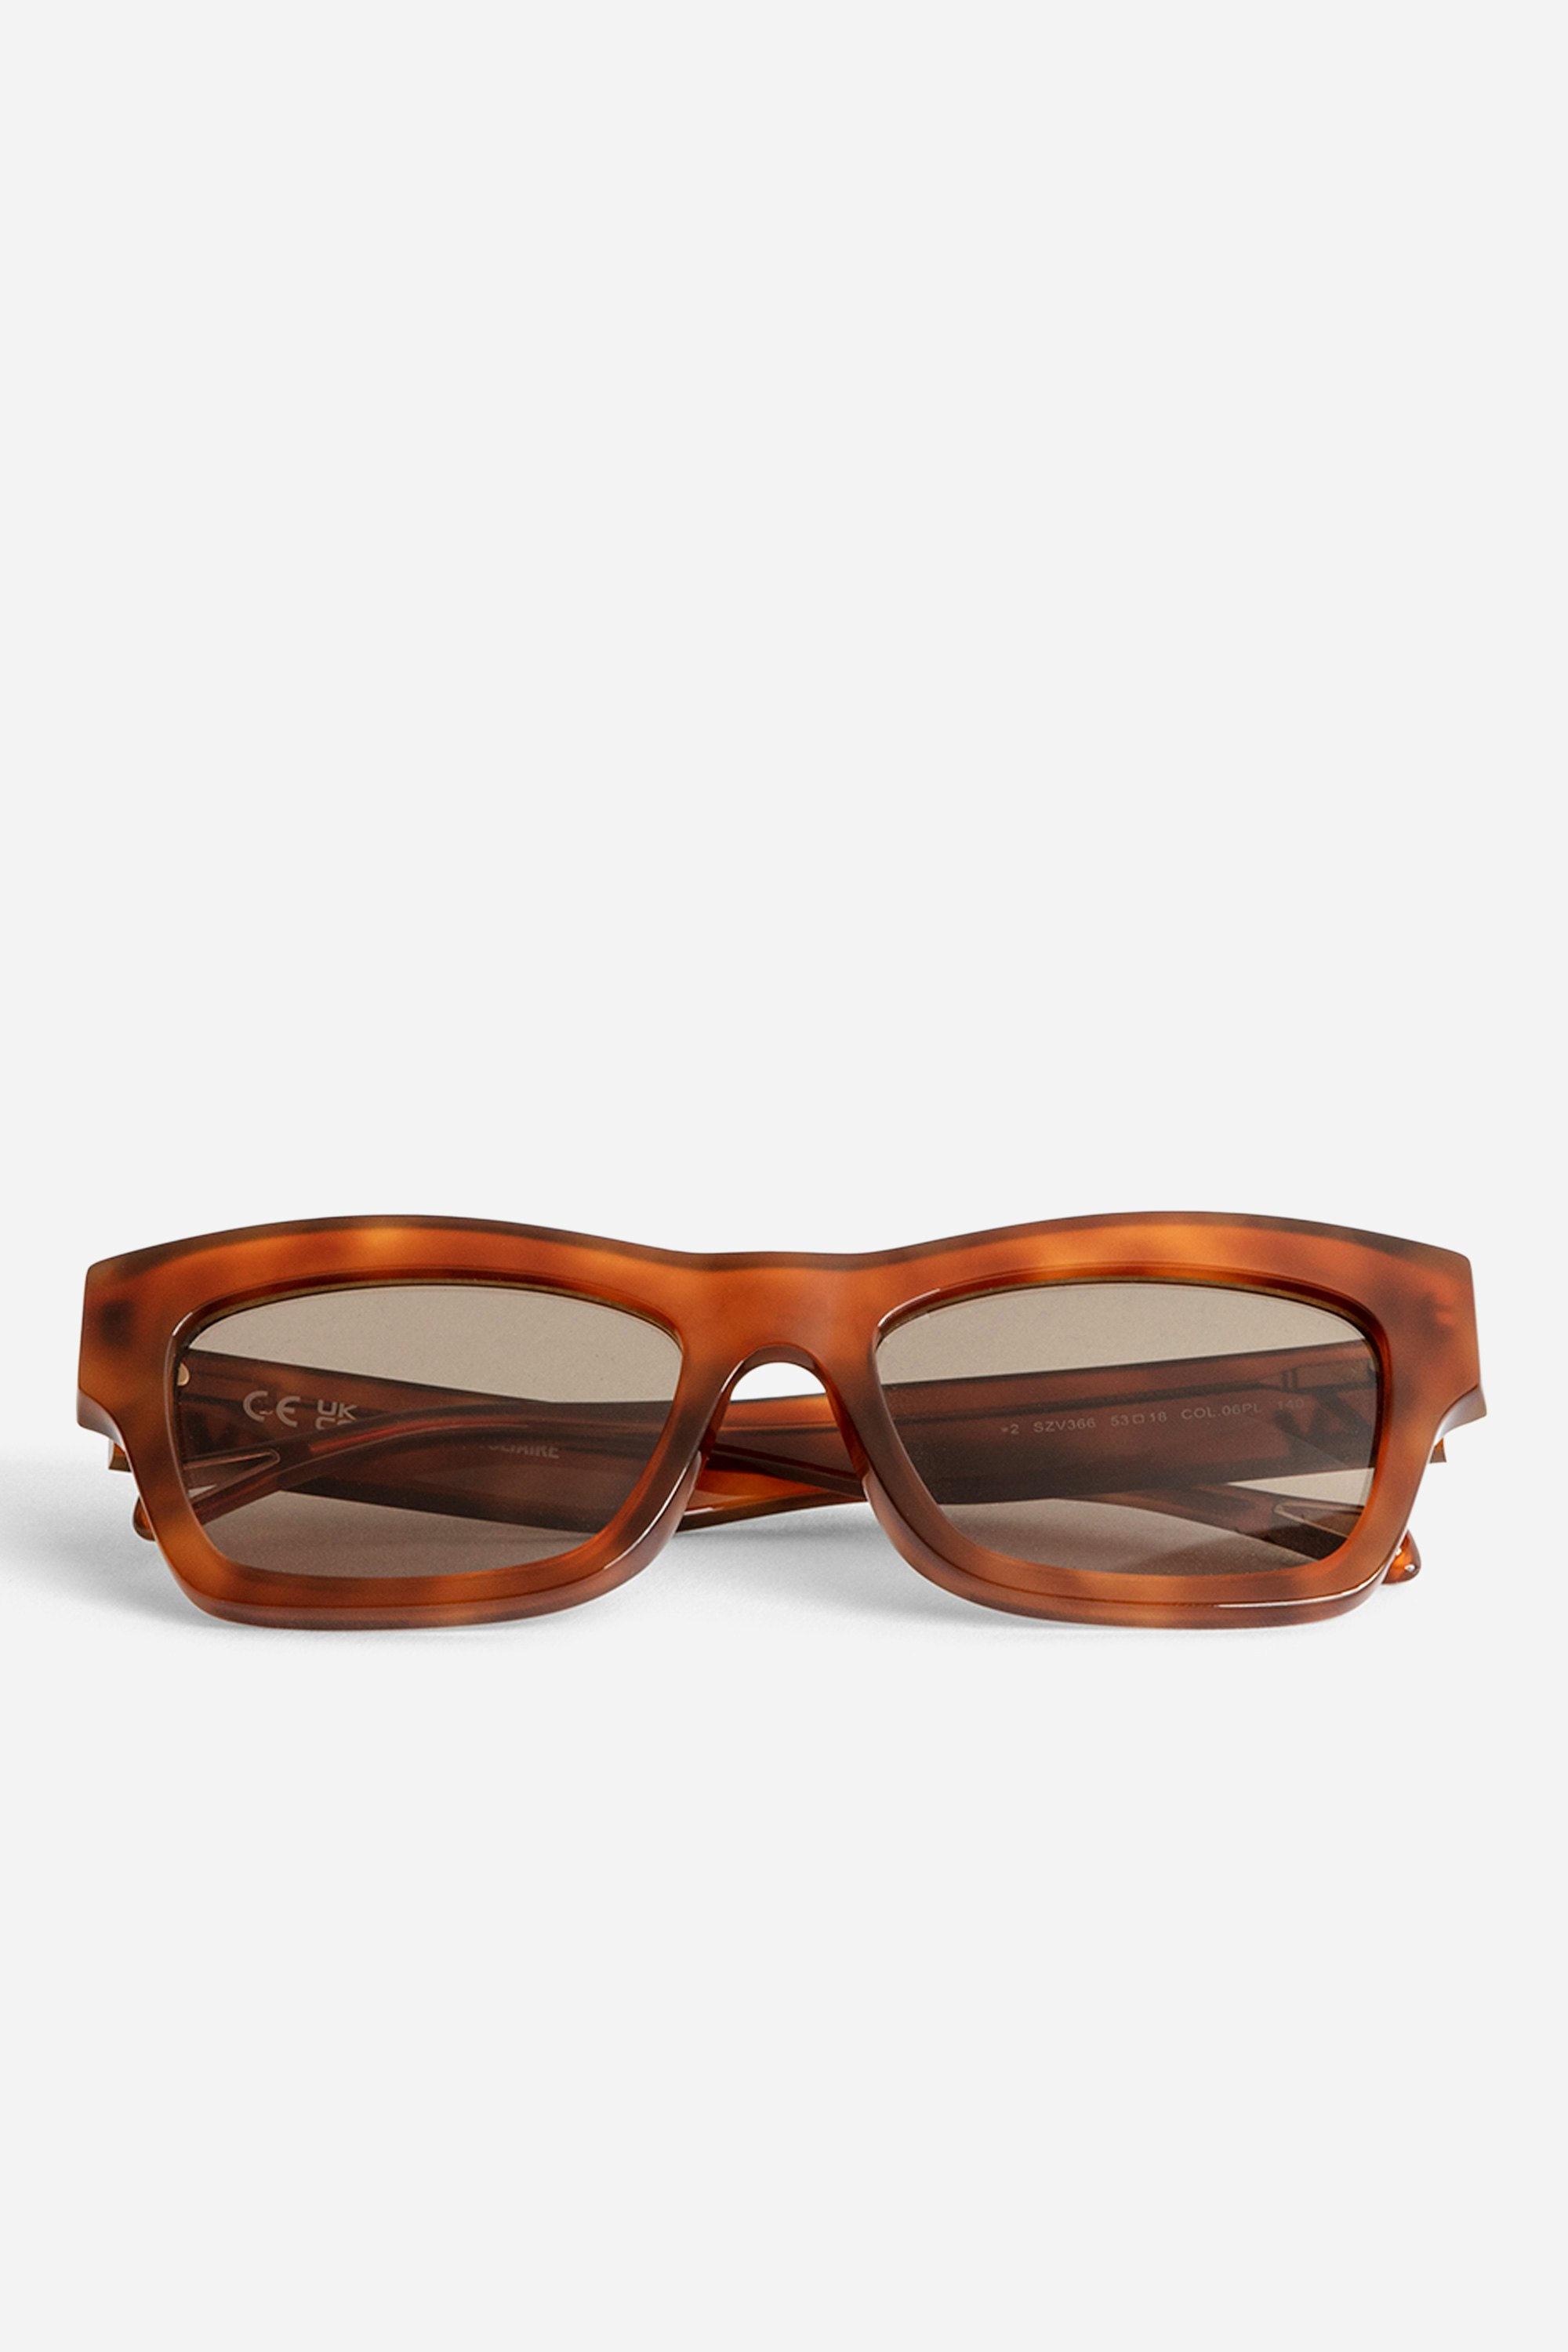 ZV23H1 Sunglasses - Unisex brown rectangular sunglasses with the ZV logo on the temples.